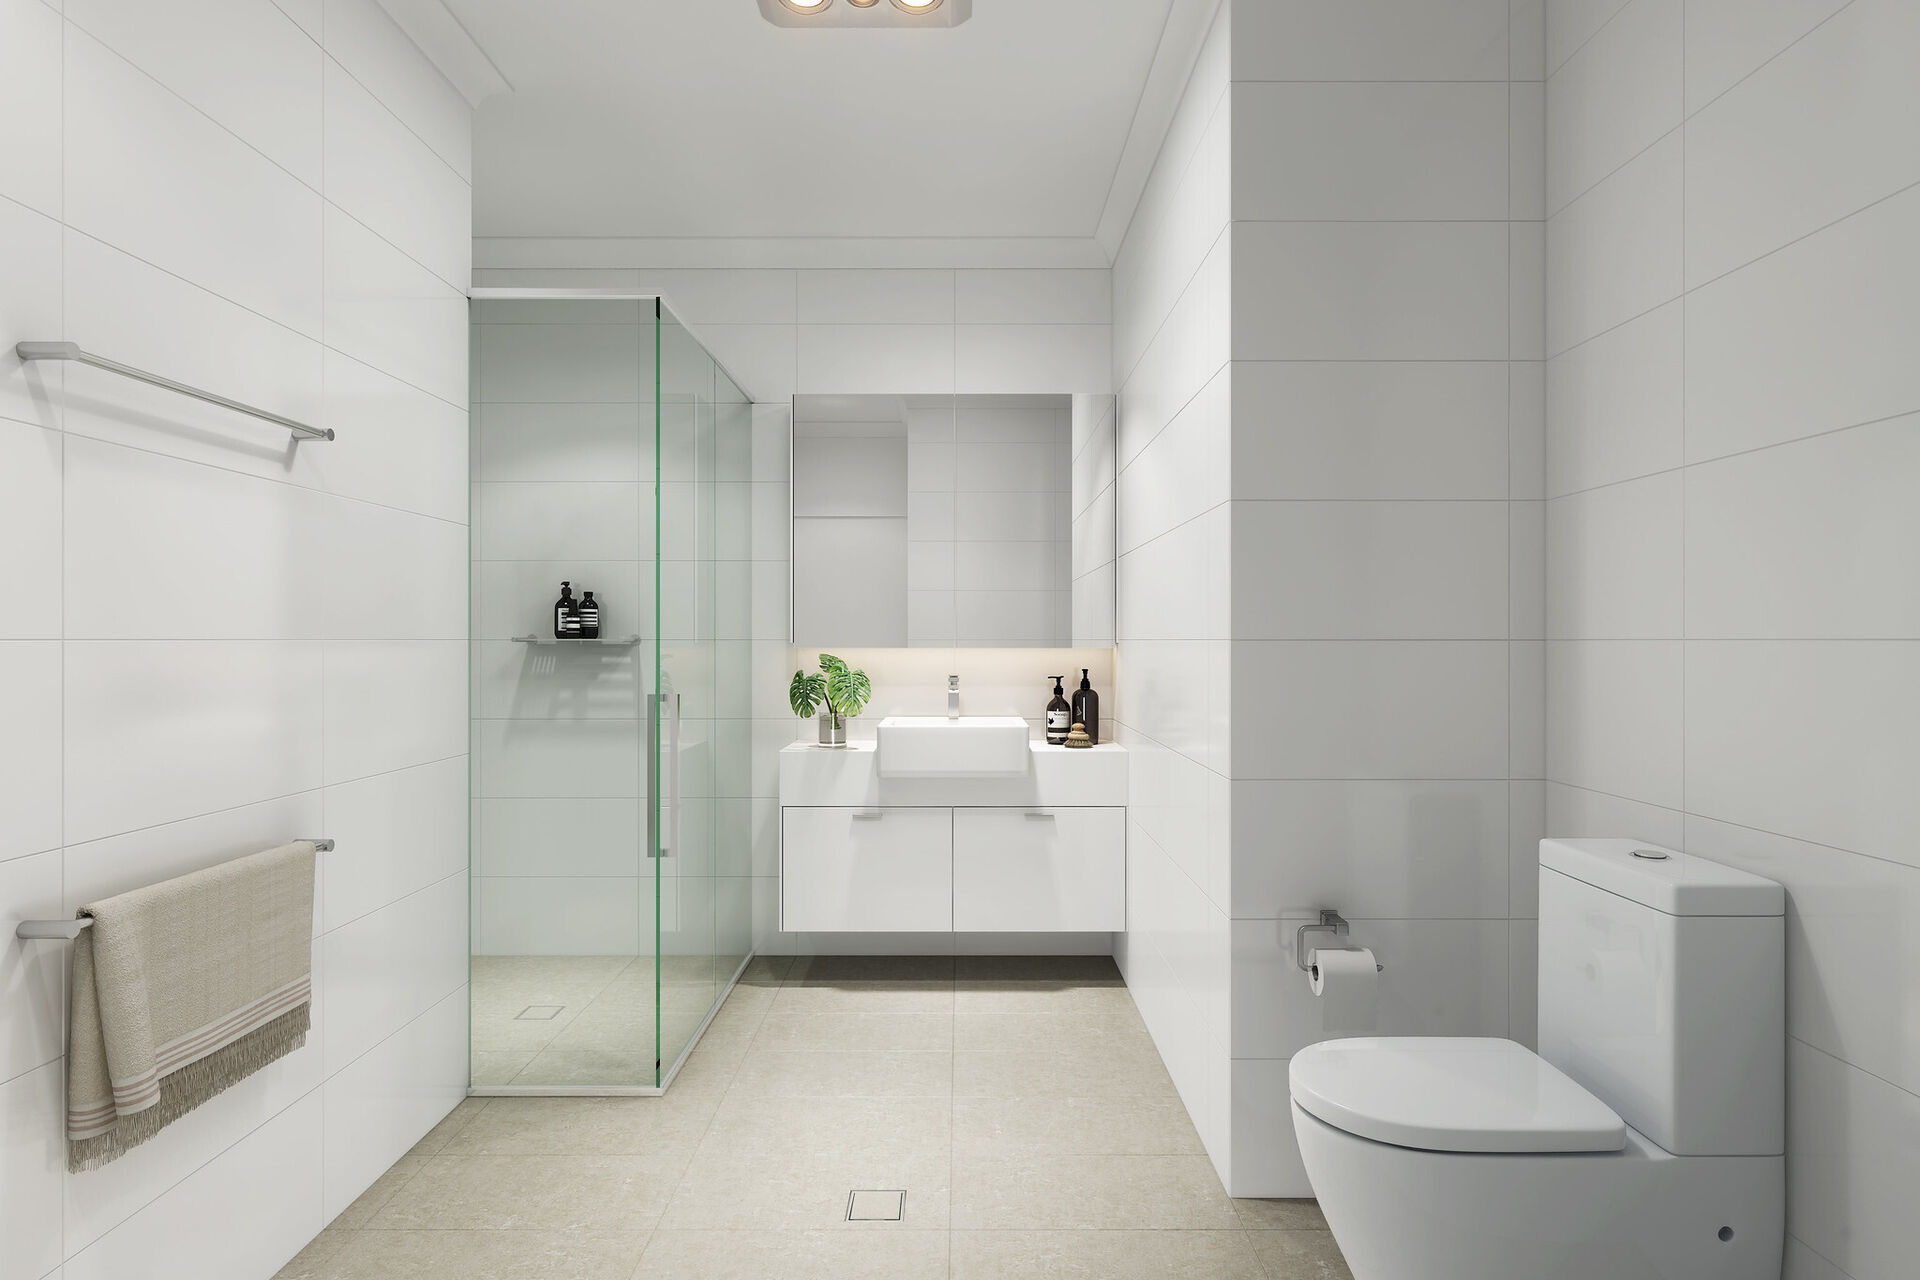 modern bathroom of retirement village apartment with floor to ceiling white tiles baptistcare maranoa village in alstonvilleallowing over 55s to downsizing opportunities